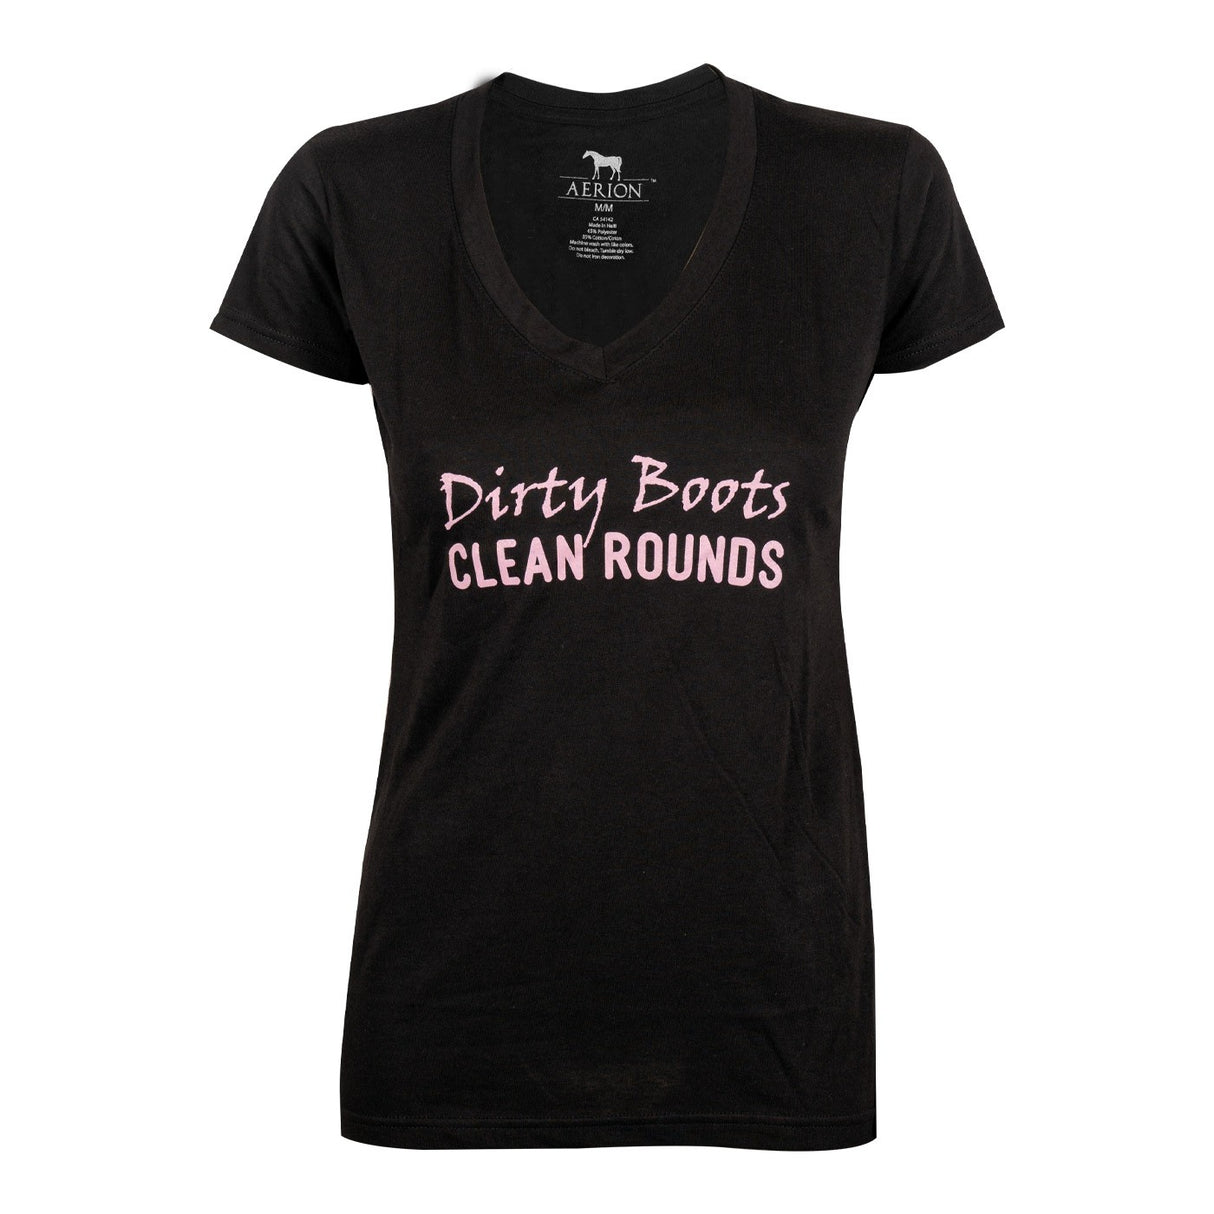 Aerion Dirty Boots Clean Rounds Tee